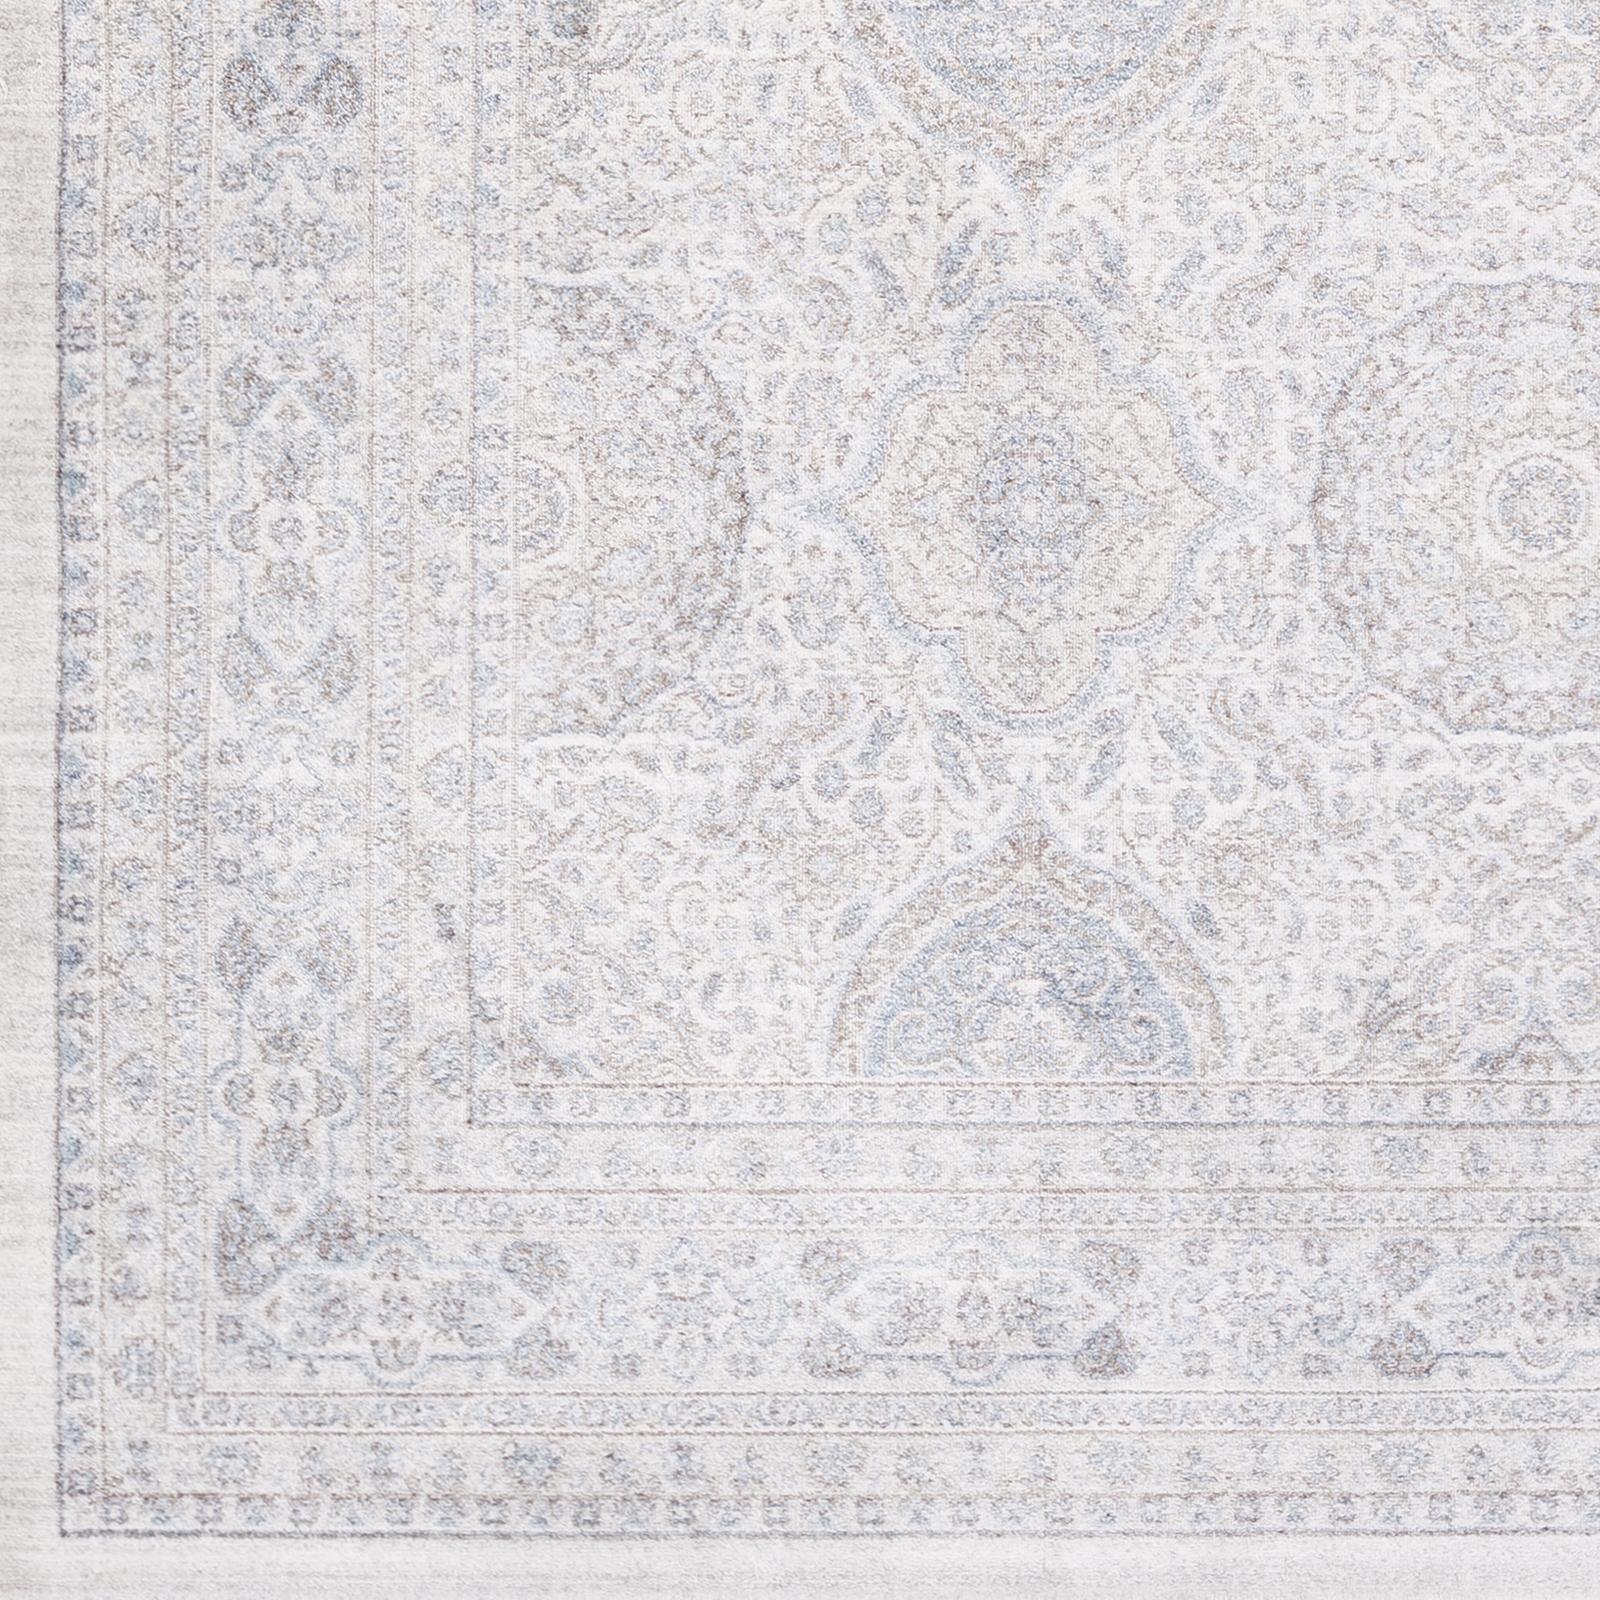 Couture Rug, 8'10" x 12' - Image 1